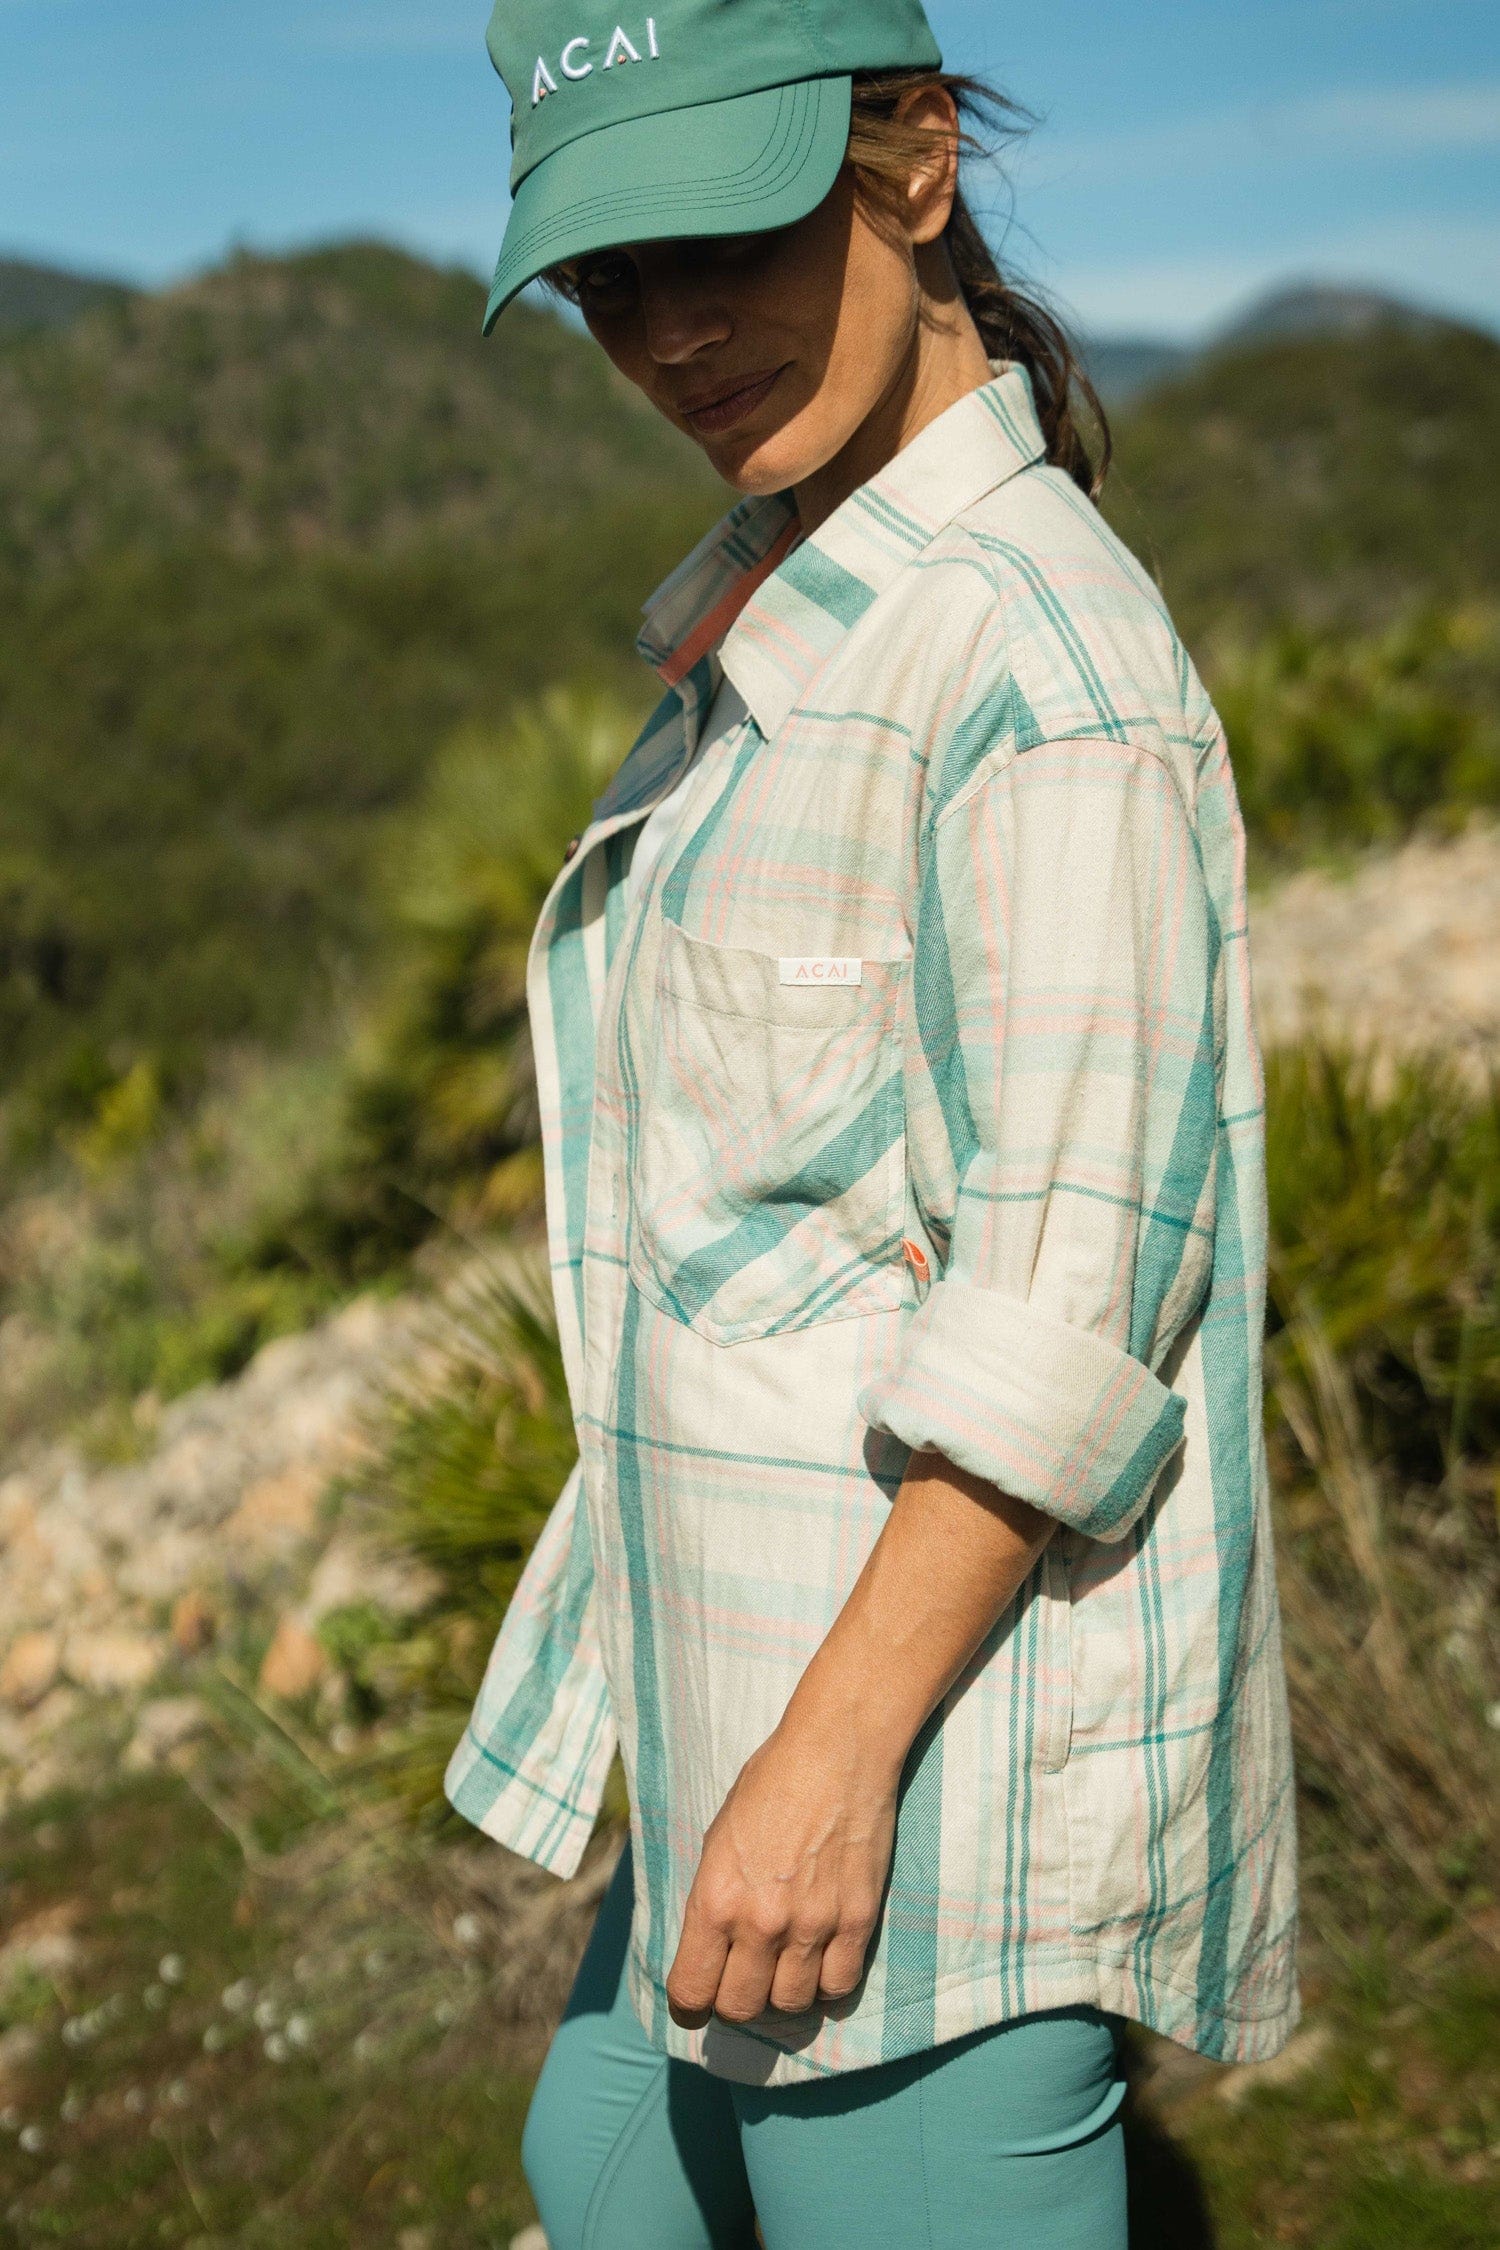 Granola Girl's Guide To Summer Hiking Clothes For Women